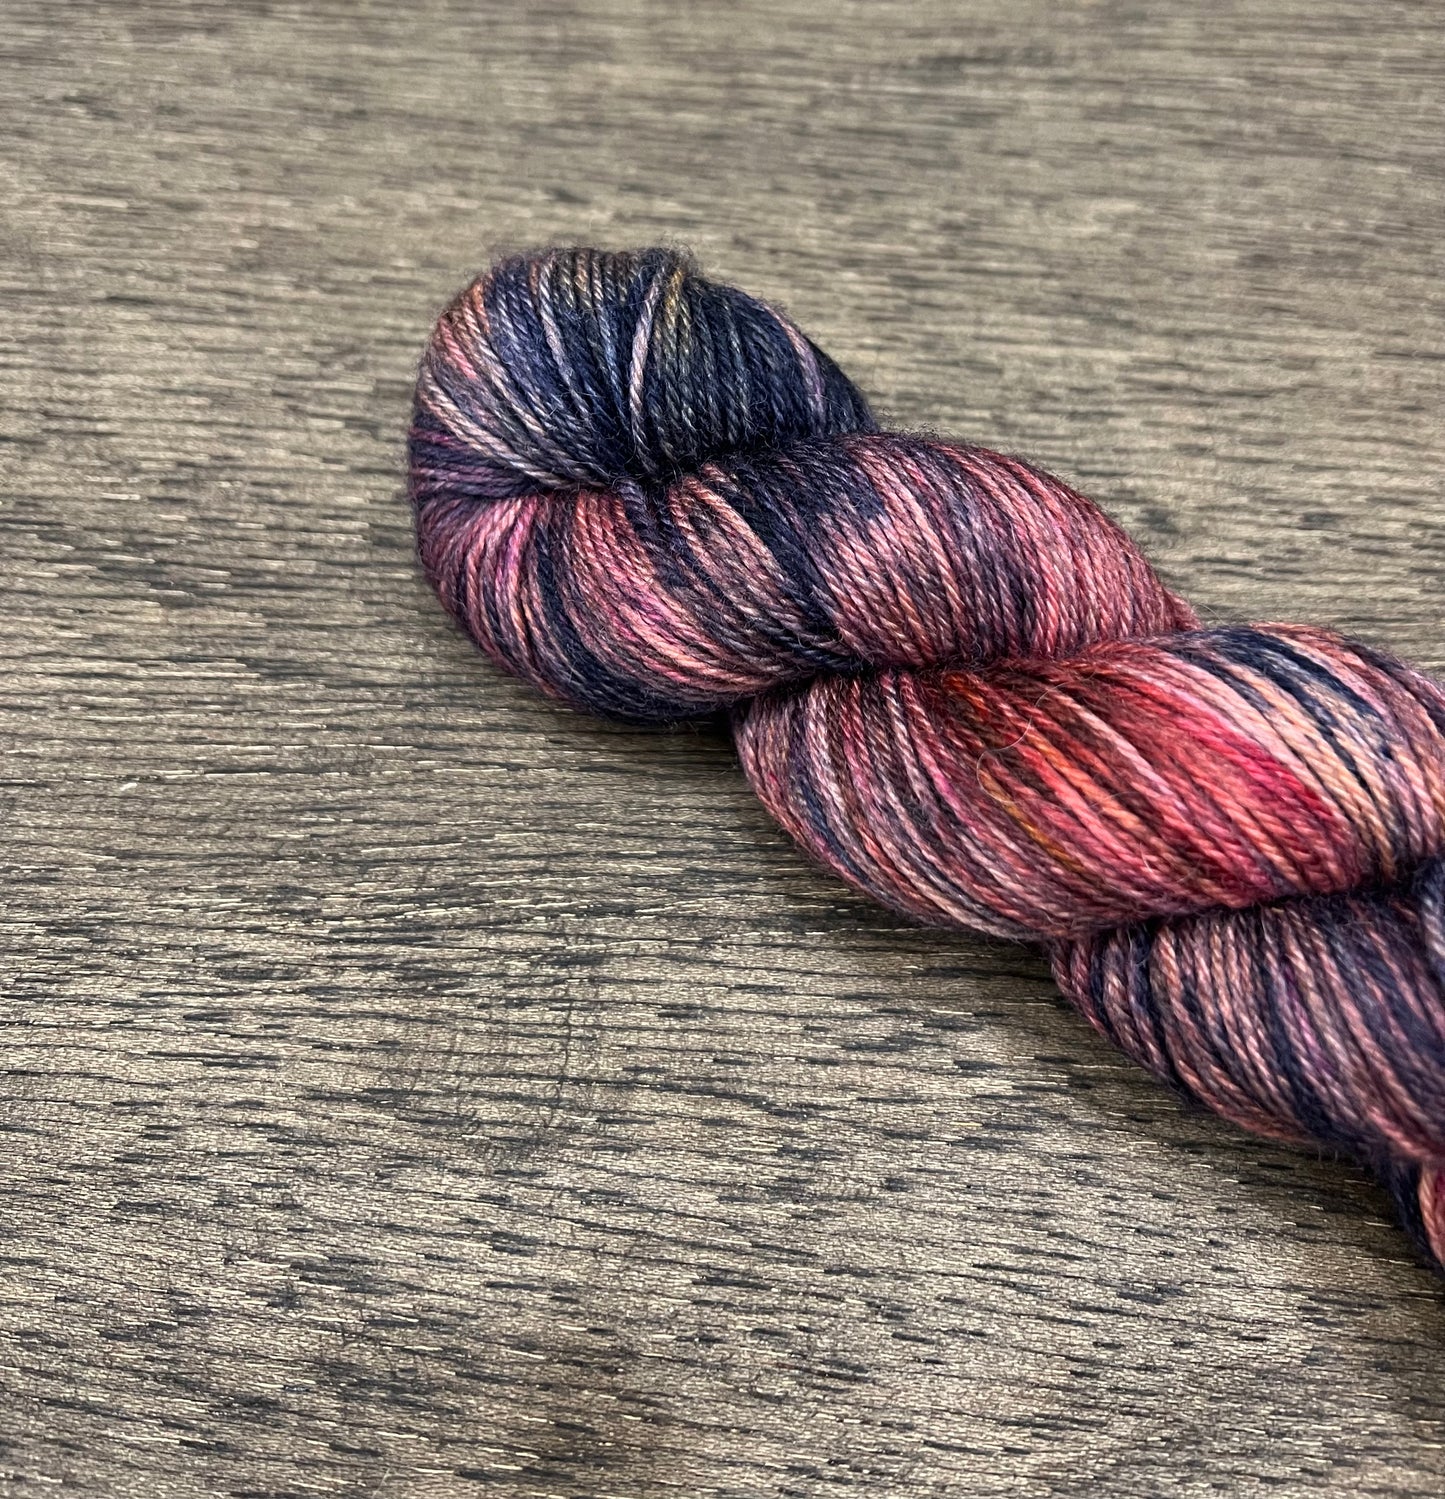 Monthly Yarn Subscriptio JUNE Mystery Skein, Yellowstone Inspired